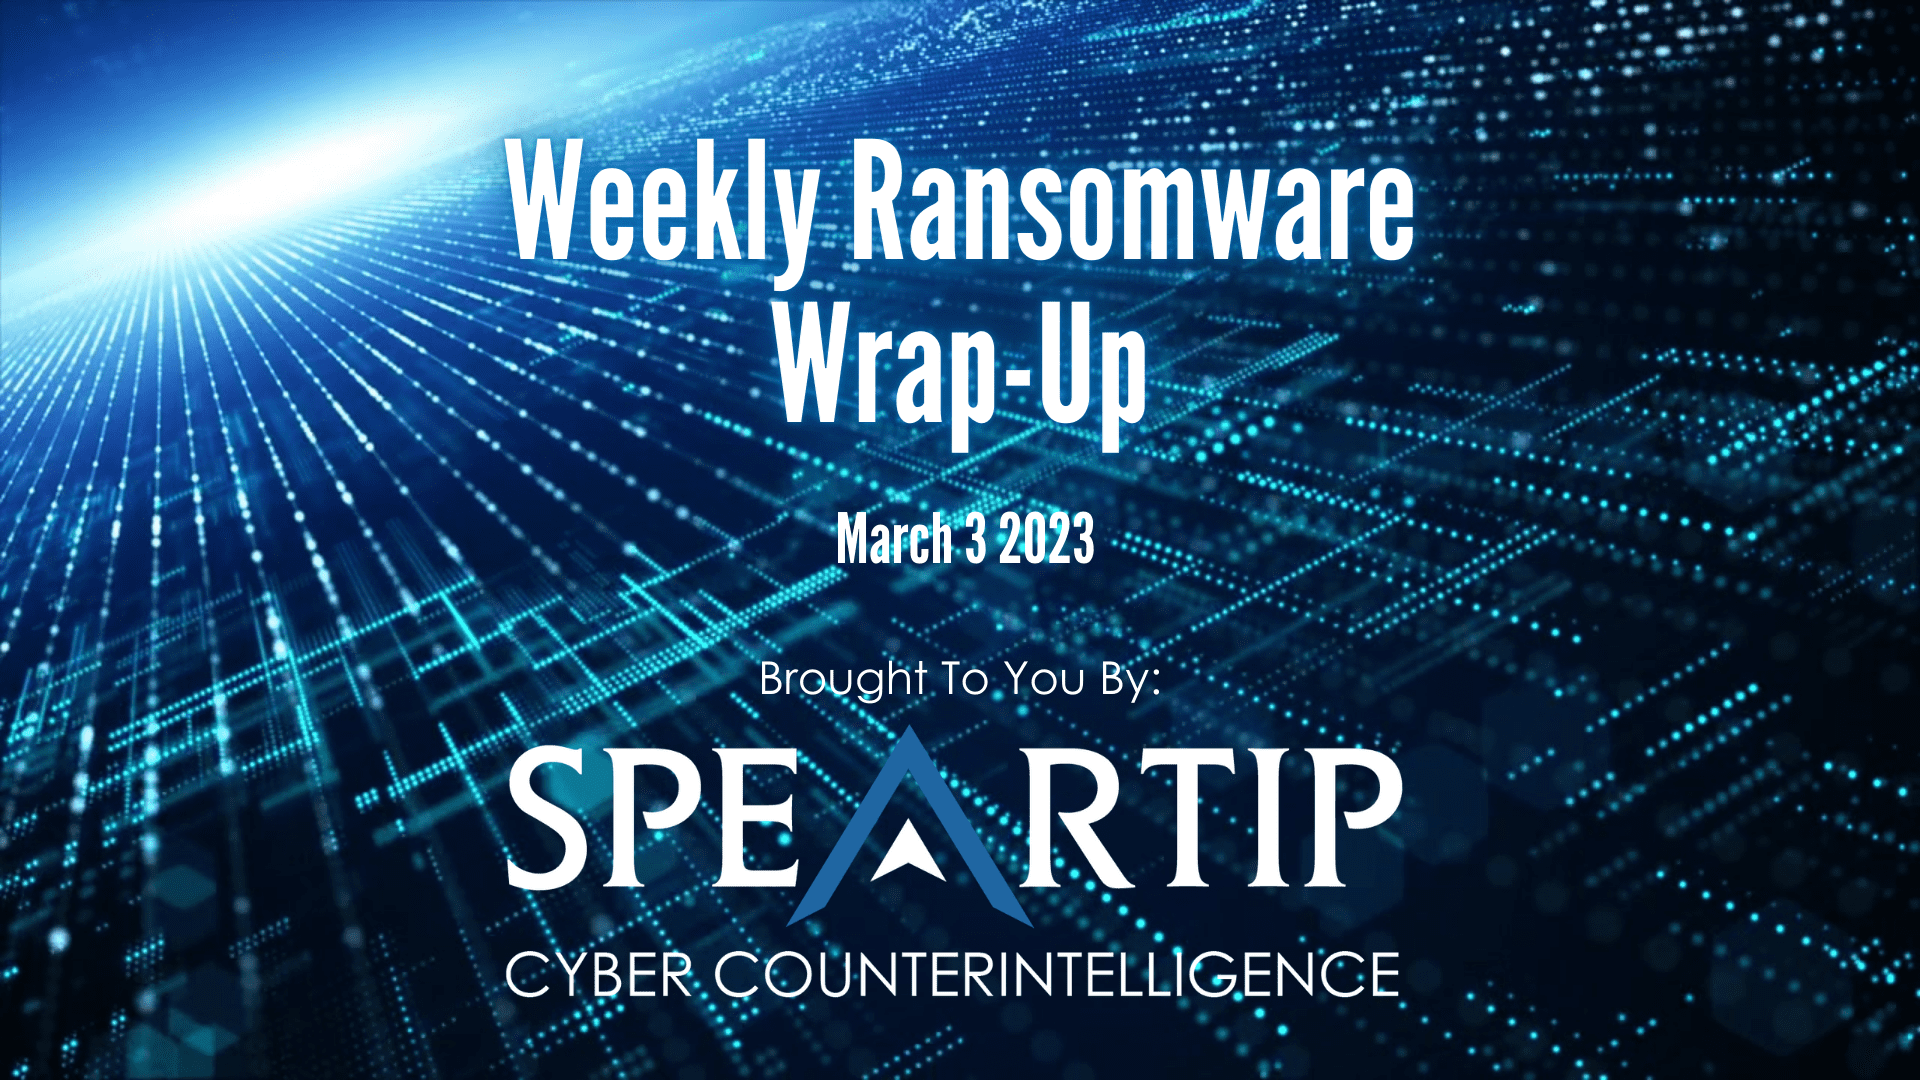 March 3, 2023 Ransomware Wrap-Up